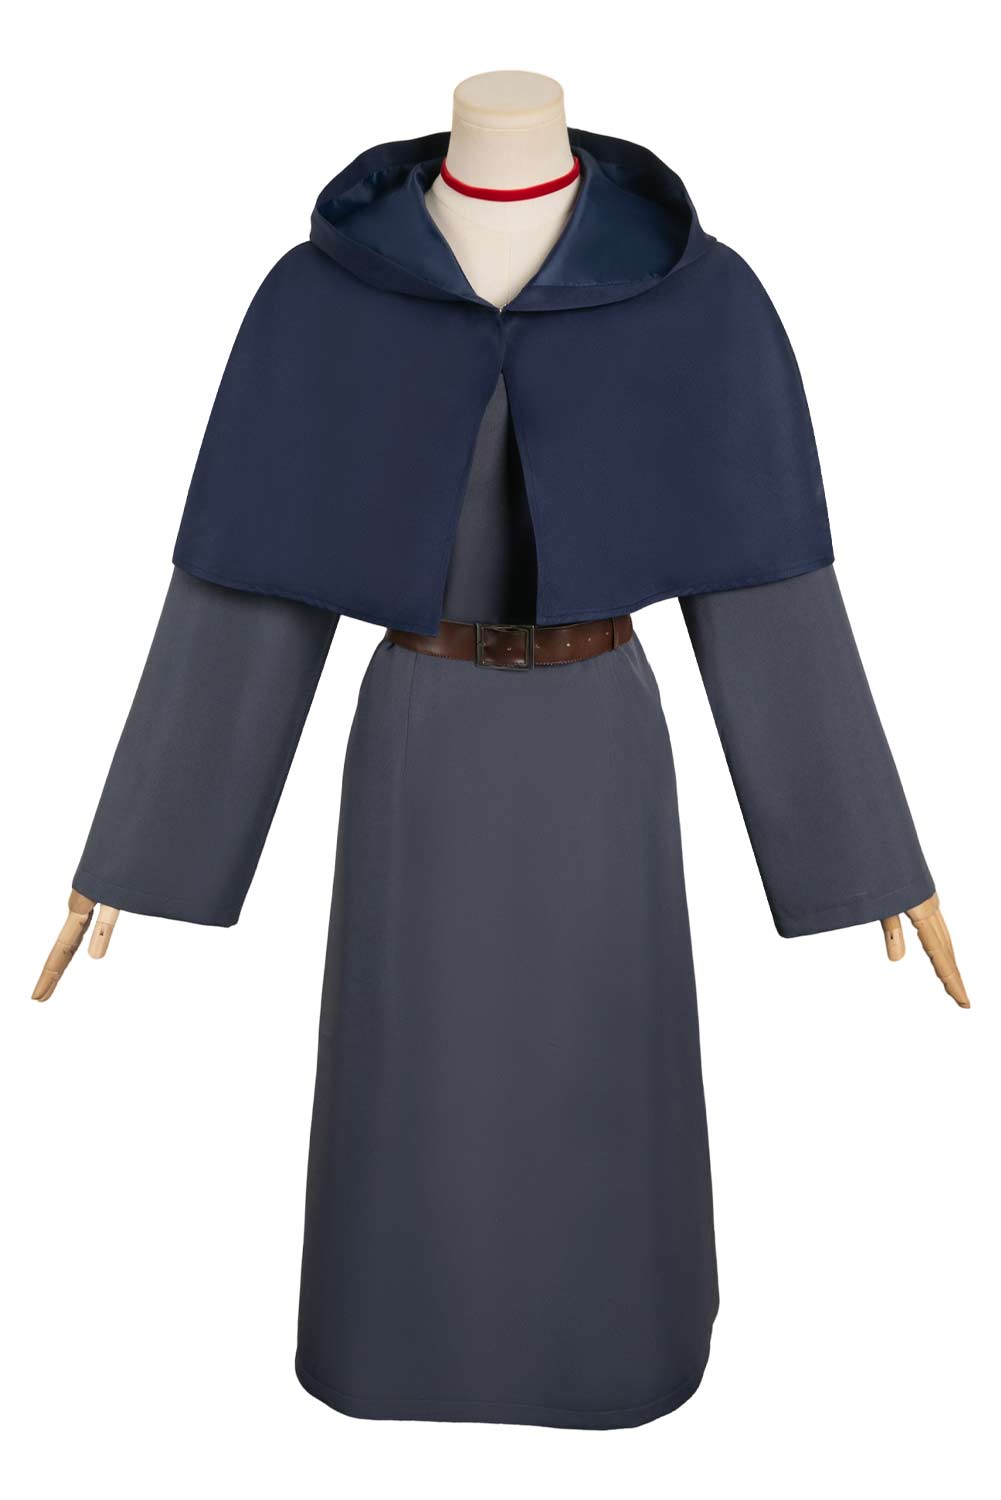 Anime Delicious in Dungeon Falin Touden Dark Blue School Uniform Outfits Halloween Carnival Suit Cosplay Costume